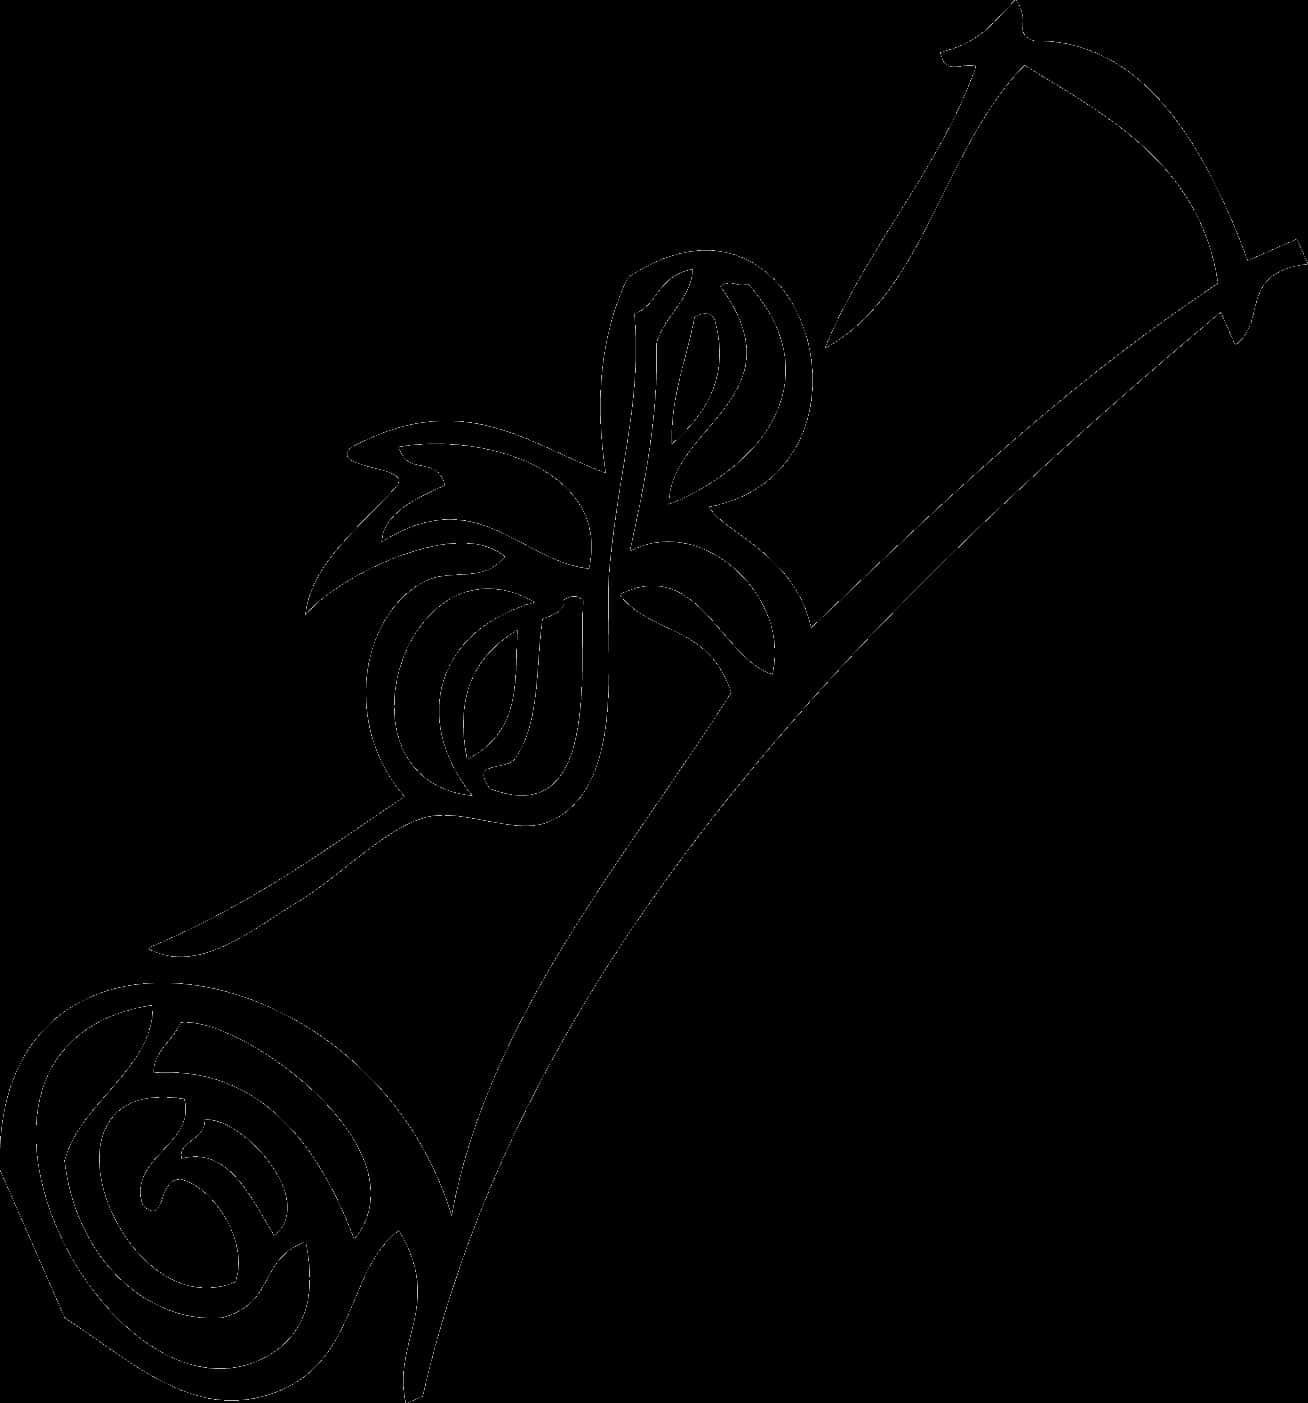 A Black Outline Of A Musical Instrument